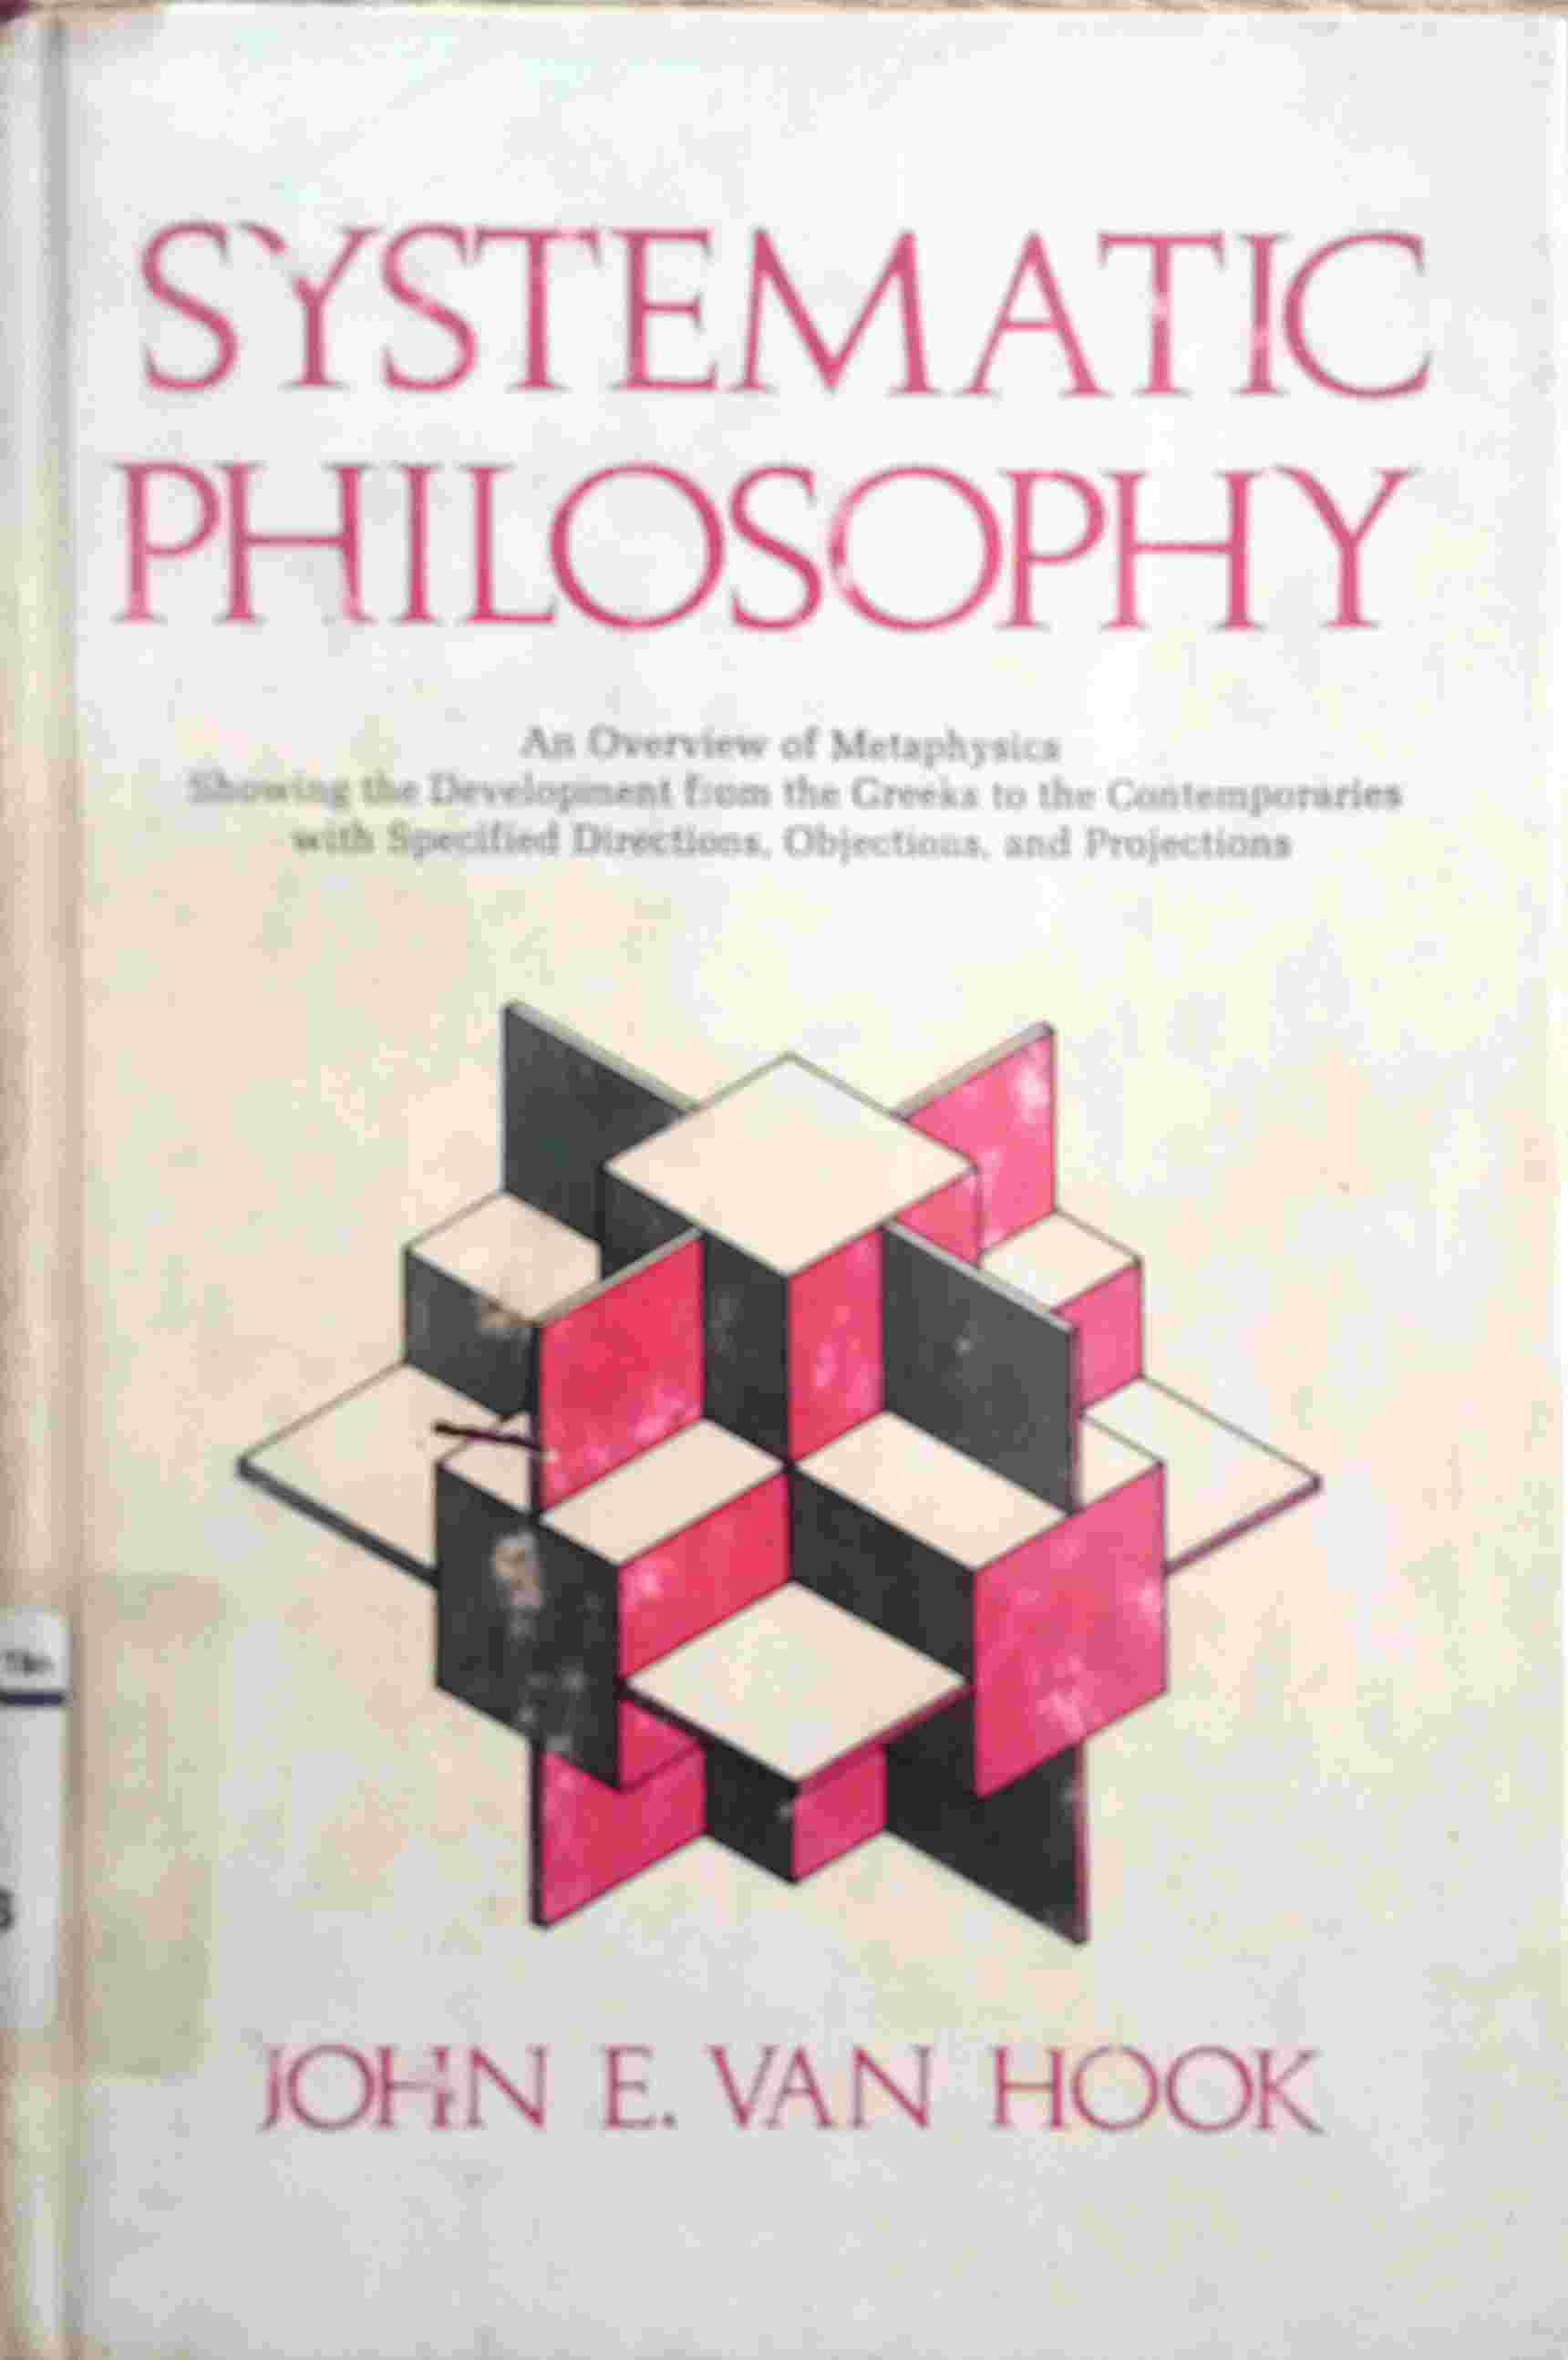 SYSTEMATIC PHILOSOPHY